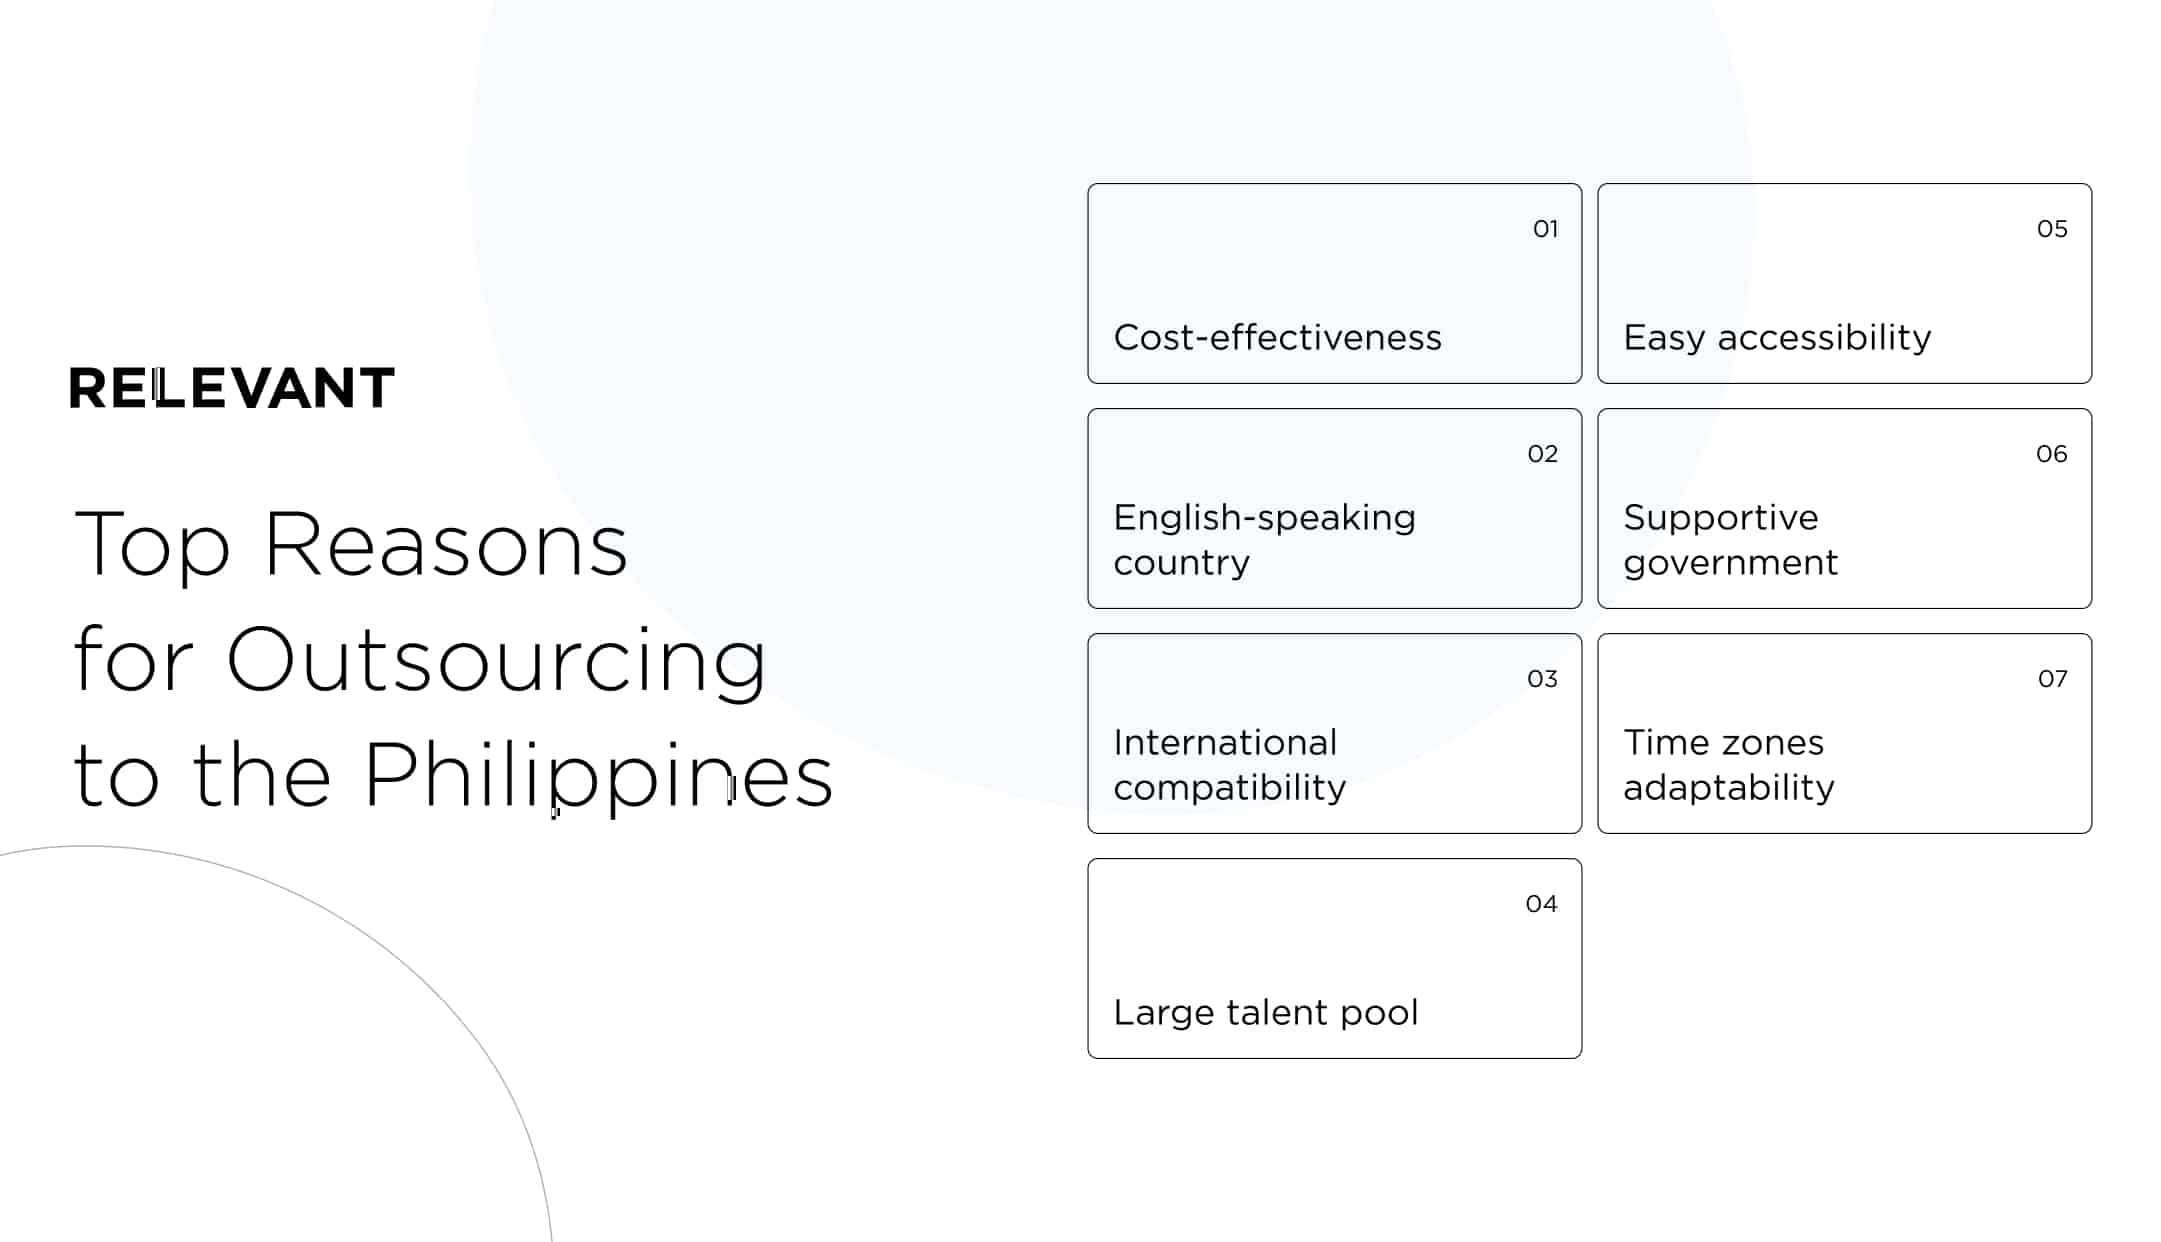 Top reasons for software development Outsourcing to the Philippines